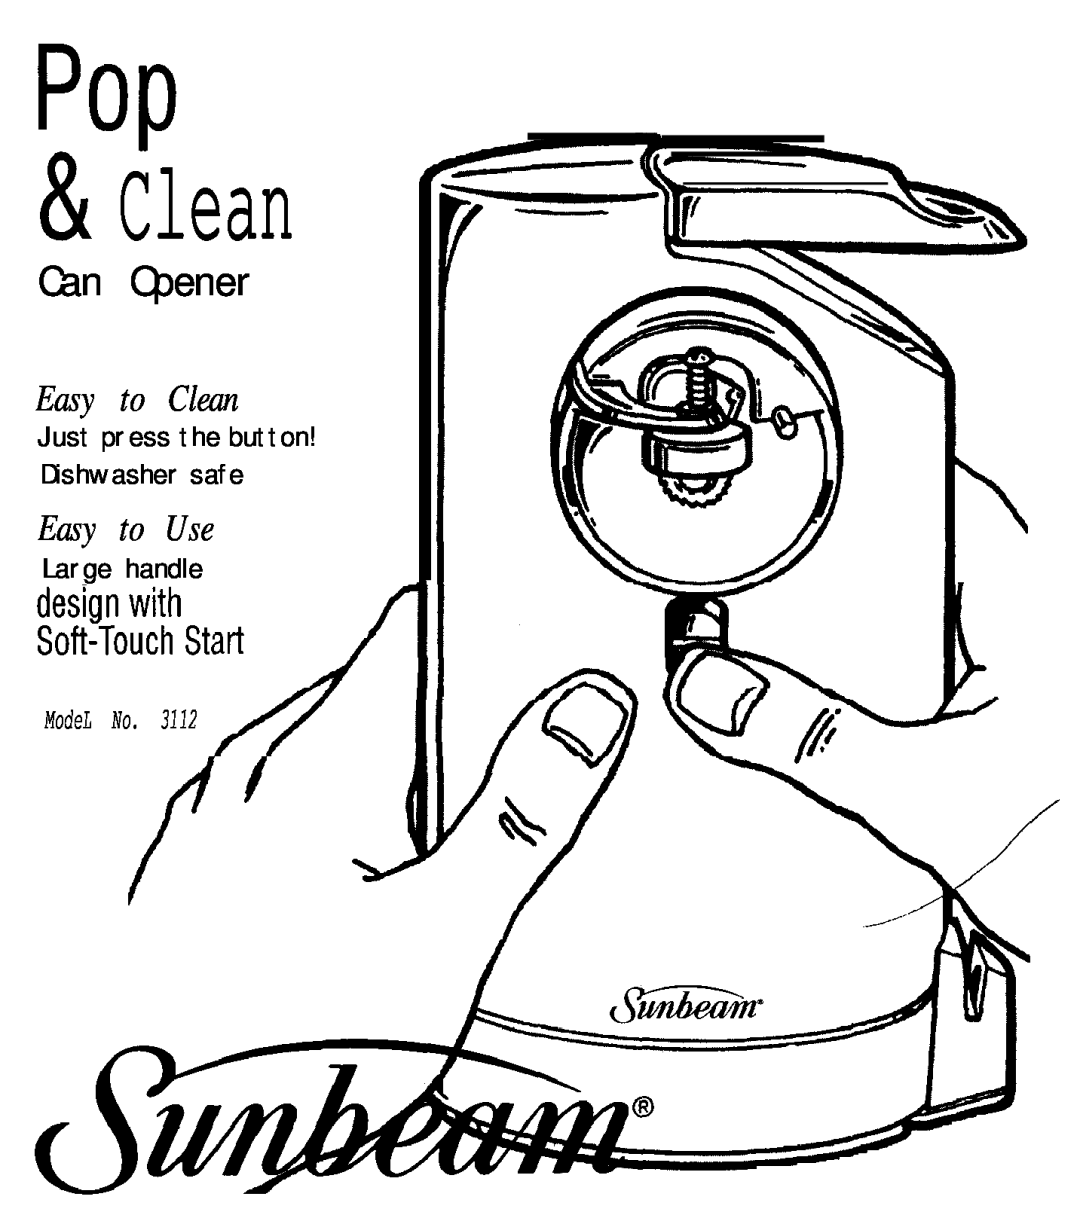 Sunbeam 3112 /Y manual POP & Clean, Can Opener, Easy to Clean, Just press the button! Dishwasher safe, Easy to Use 